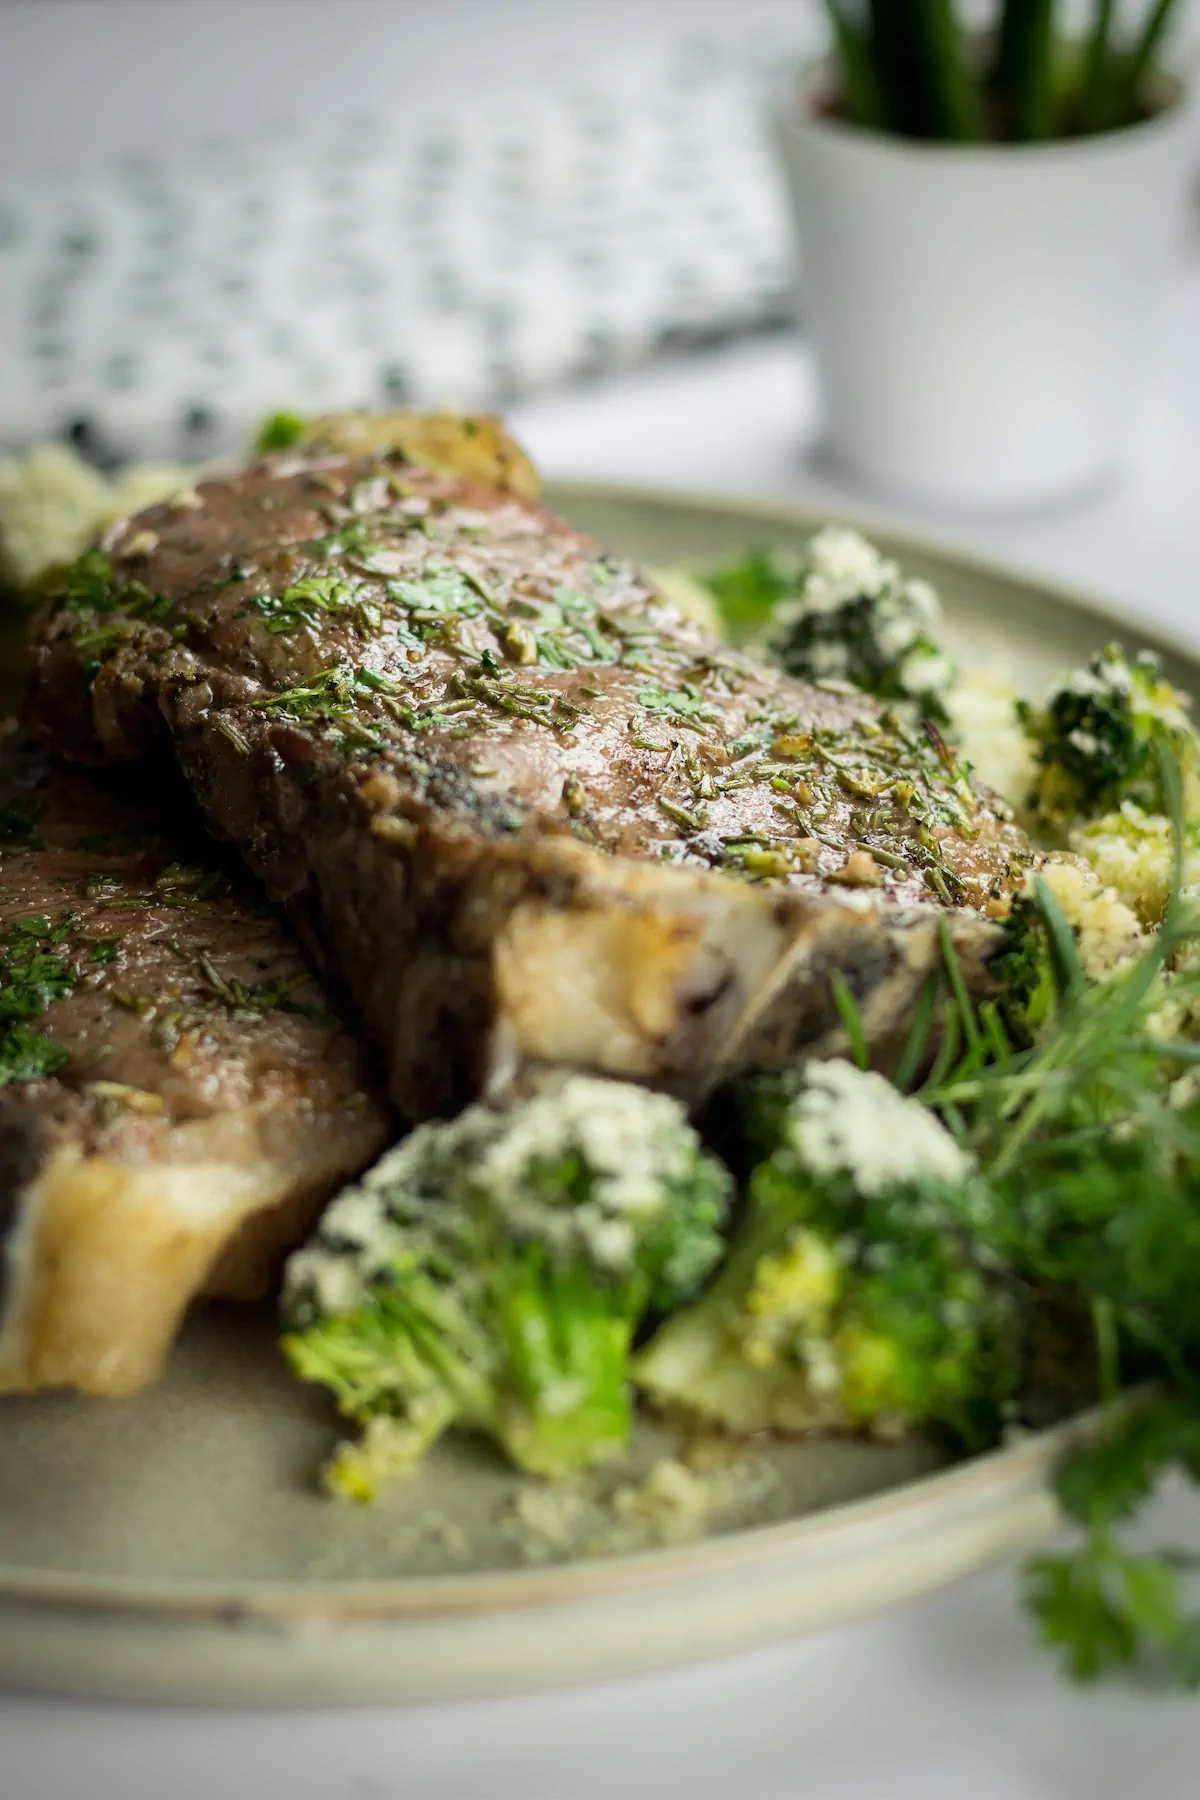 Homemade oven-baked ribeye steak with cheesy roasted broccoli, presented on a plate.